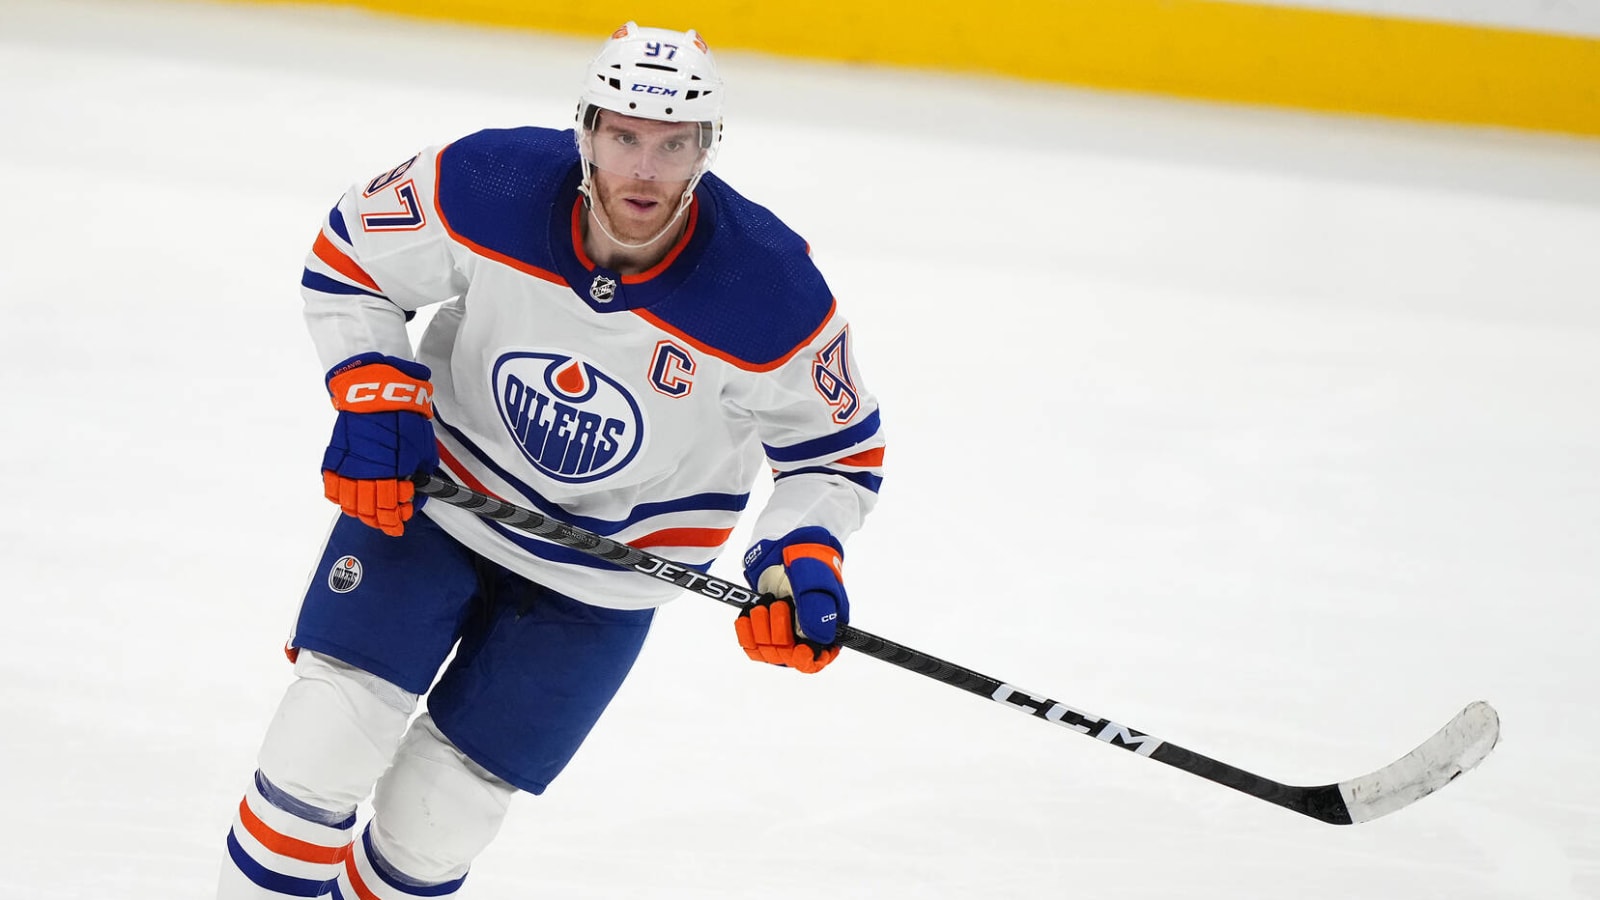 Is there still a realistic path for the Oilers to make the playoffs?